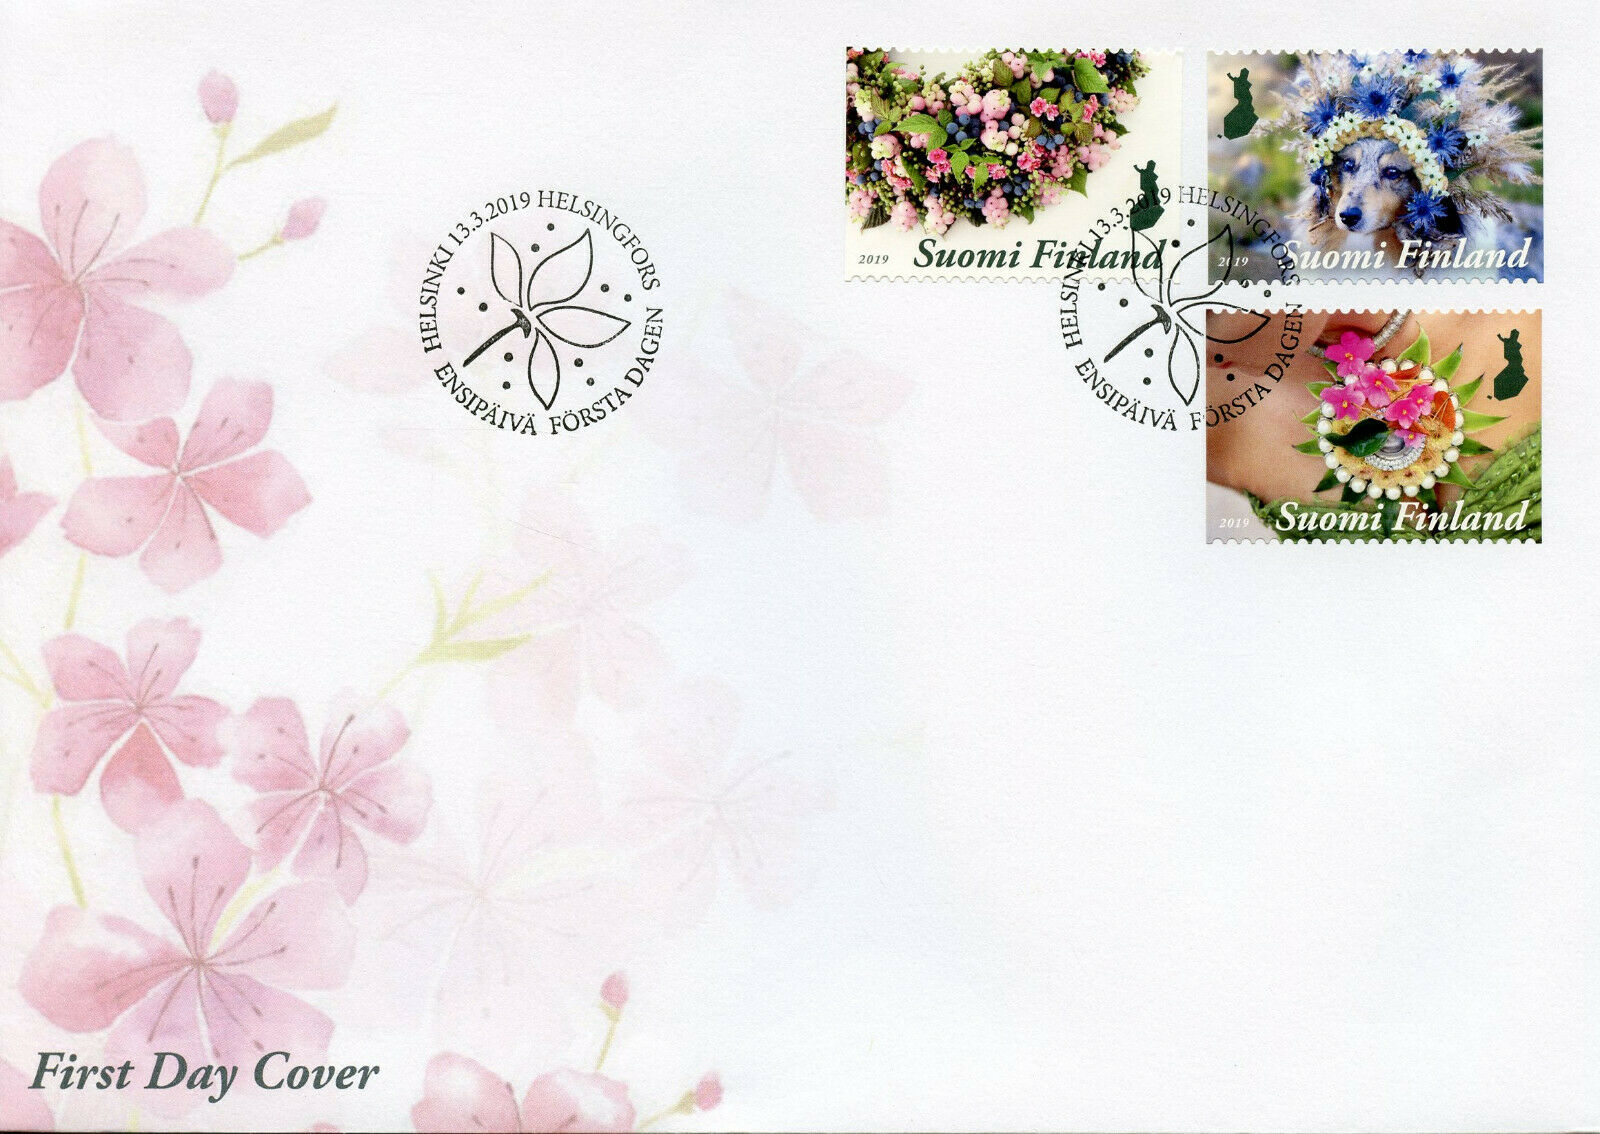 Finland 2019 FDC Floral Artistry 3v S/A Cover Dogs Flowers Plants Nature Stamps